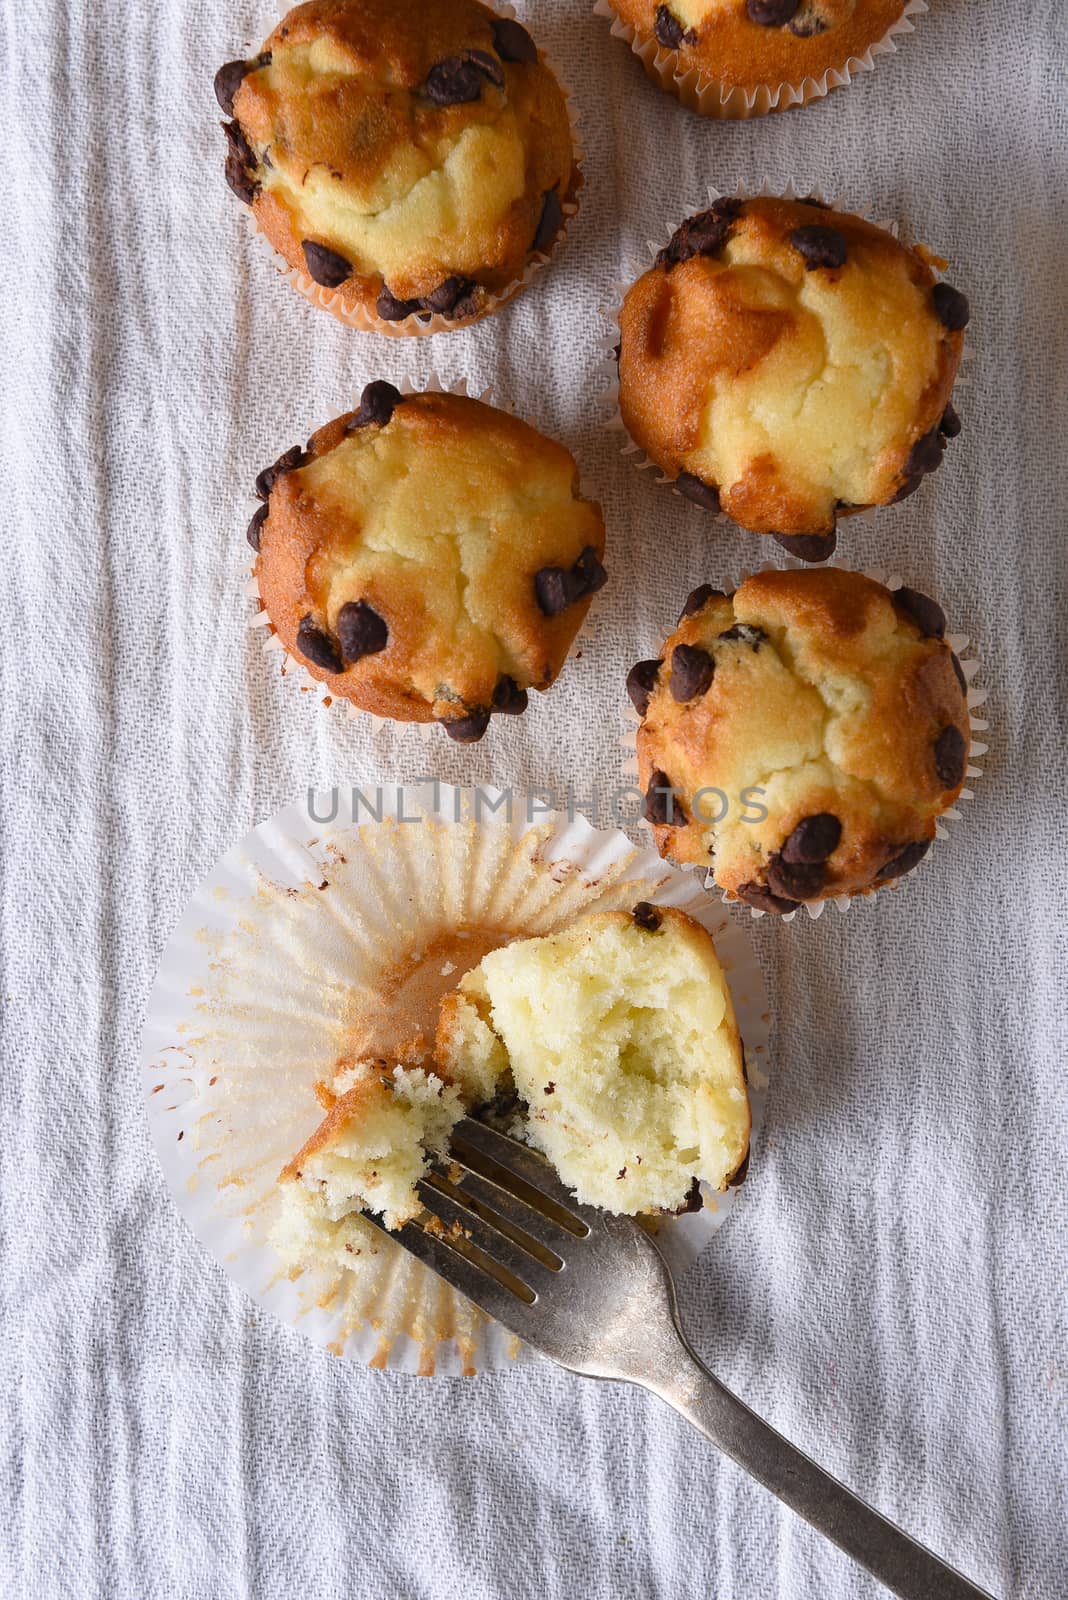 Overhead view of a group of mini chocolate chip muffins on a kitchen towel. One muffin is cut into with a fork.